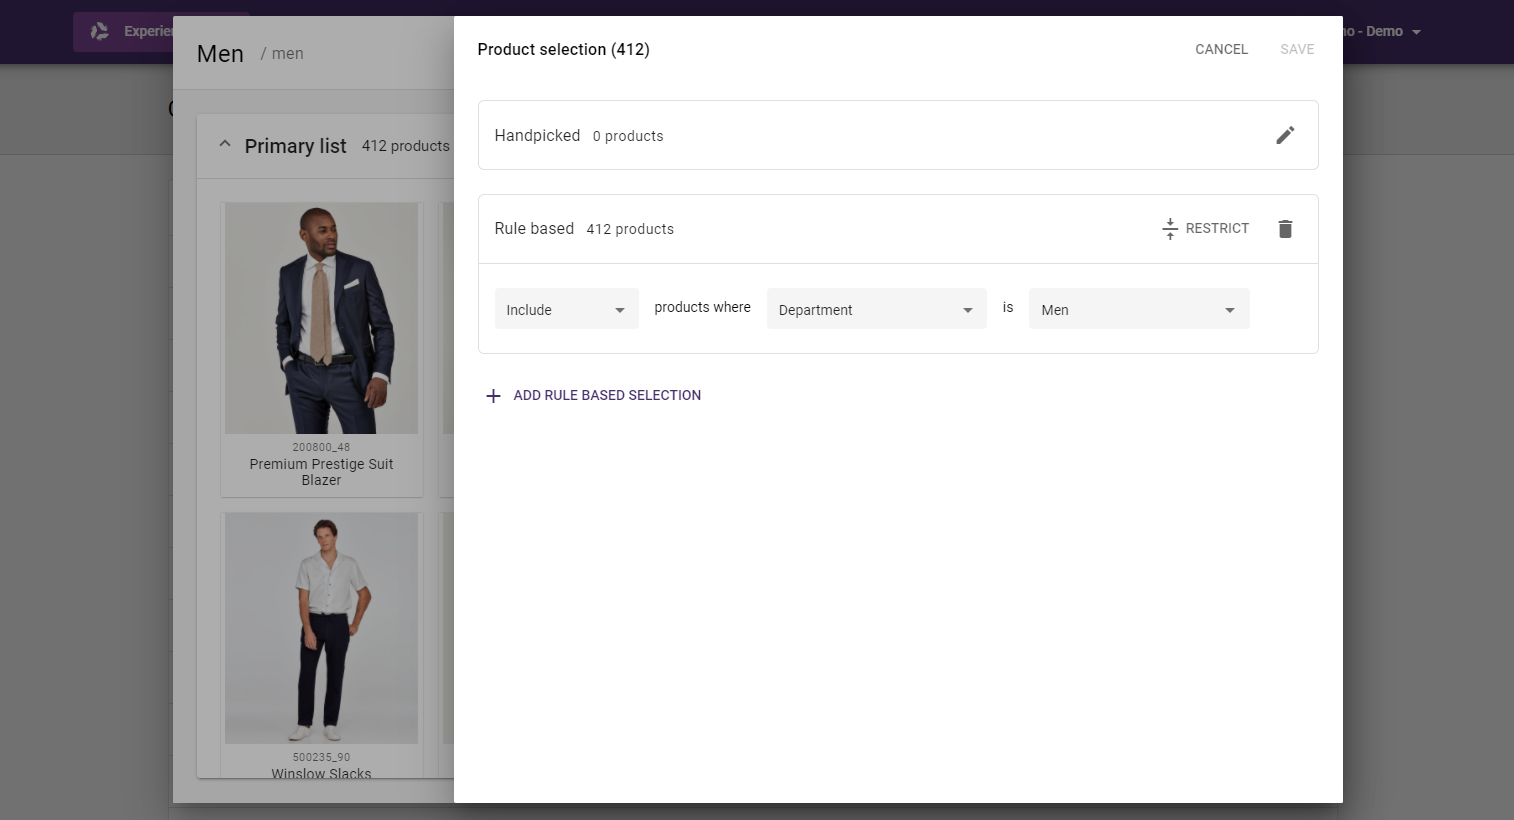 Screenshot of Category and Landing Page - Product selection